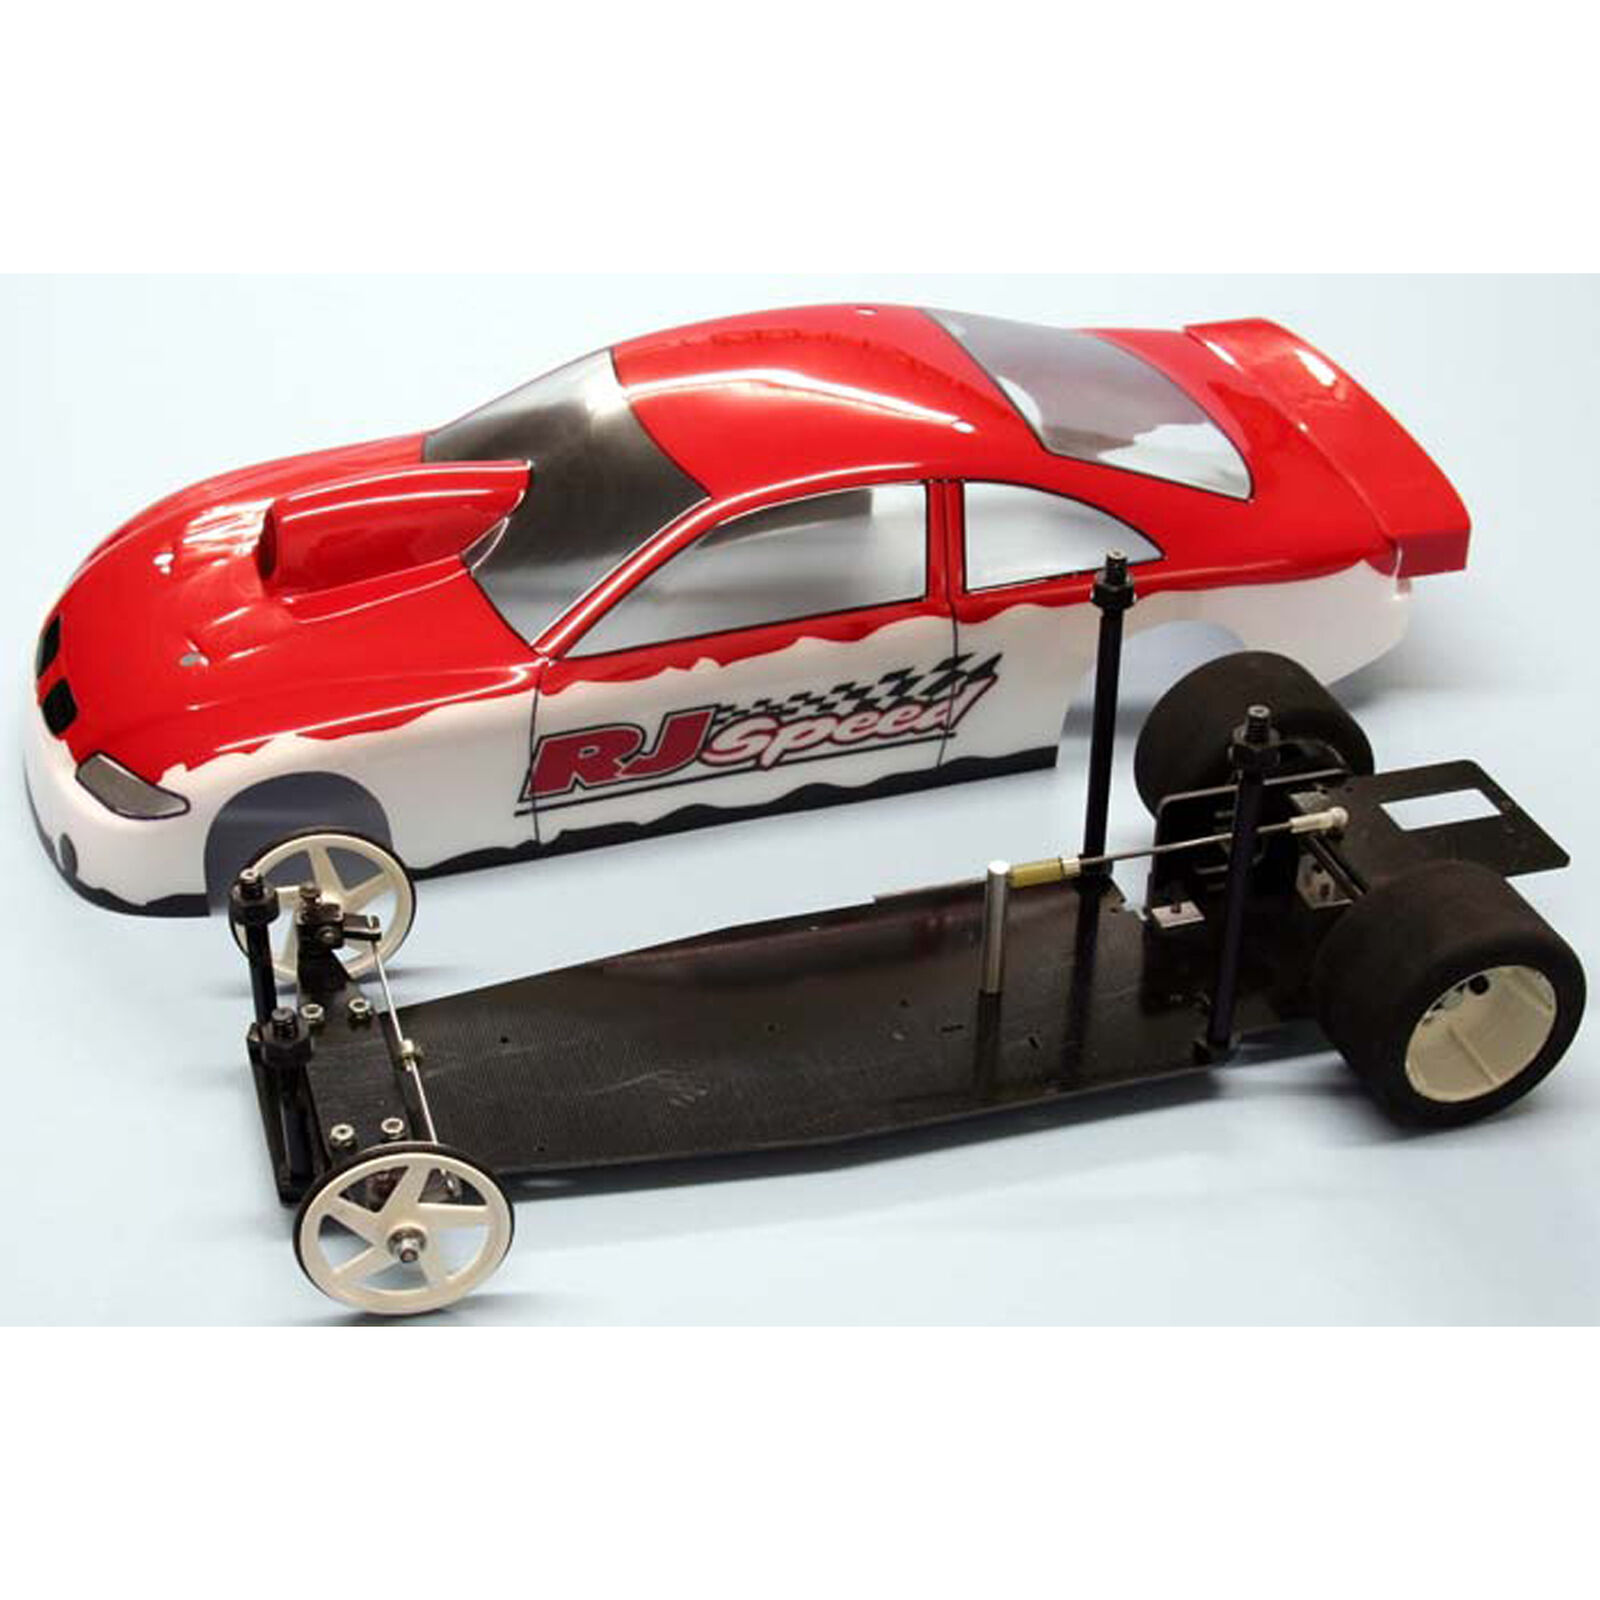 1/10 Electric Pro Stock 2WD Dragster Kit, 11"